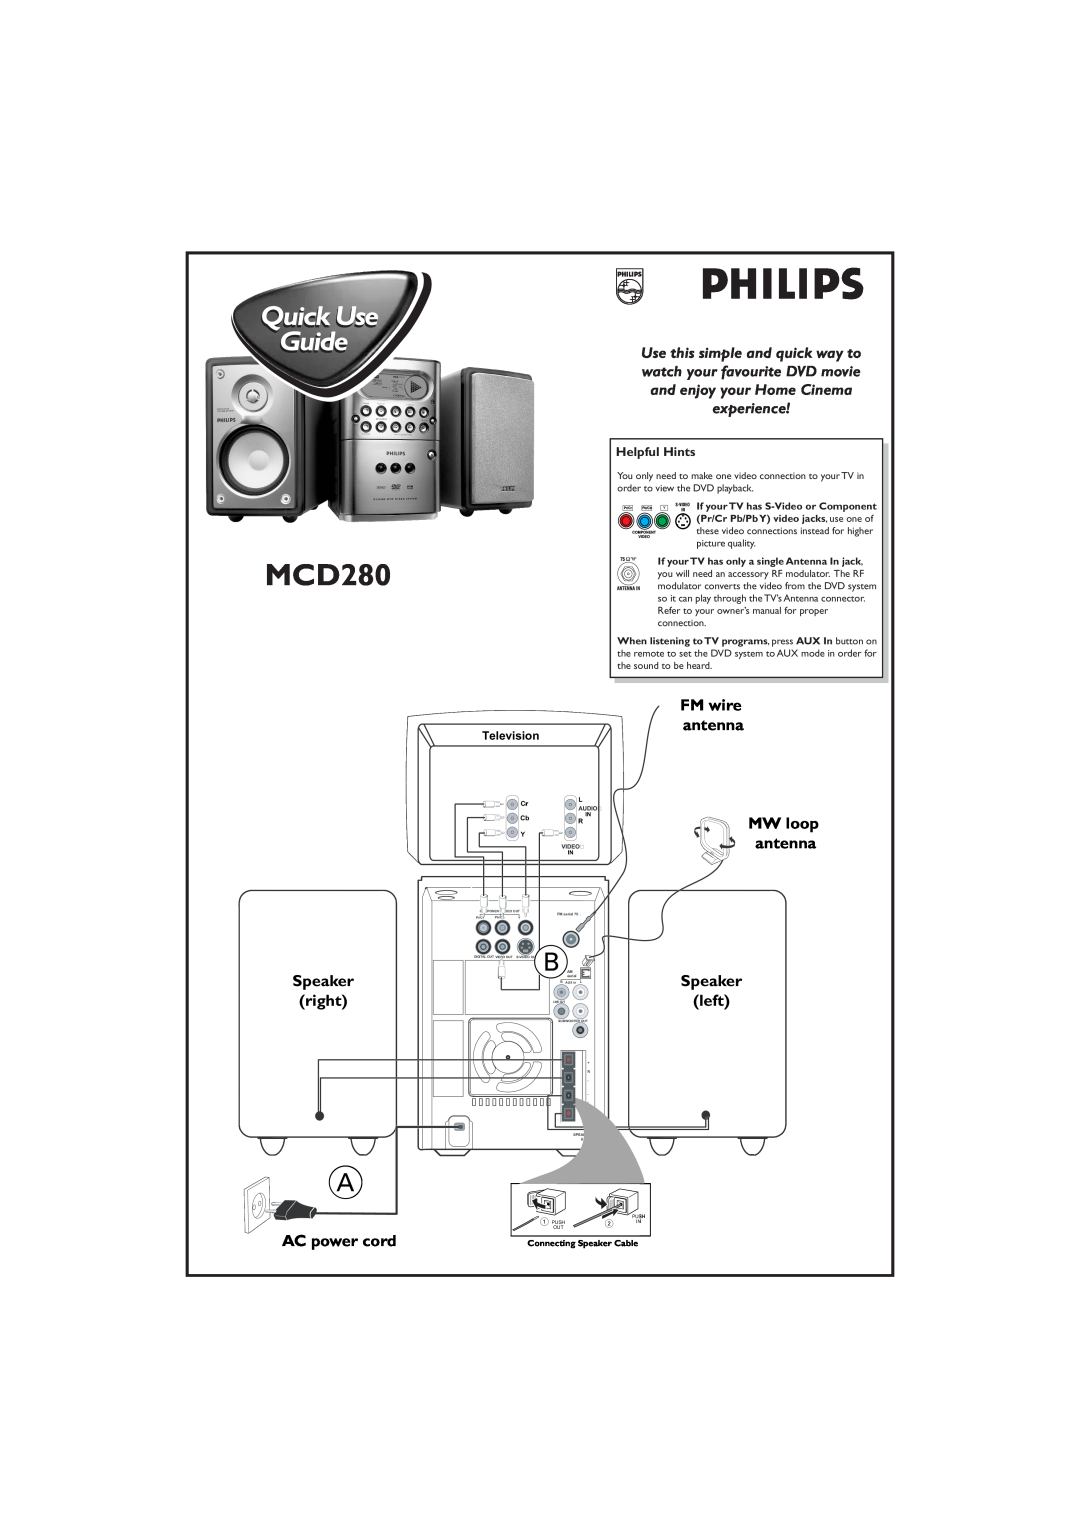 Philips MCD280/30 owner manual FM wire antenna, right, MW loop antenna Speaker left, AC power cord, Helpful Hints 